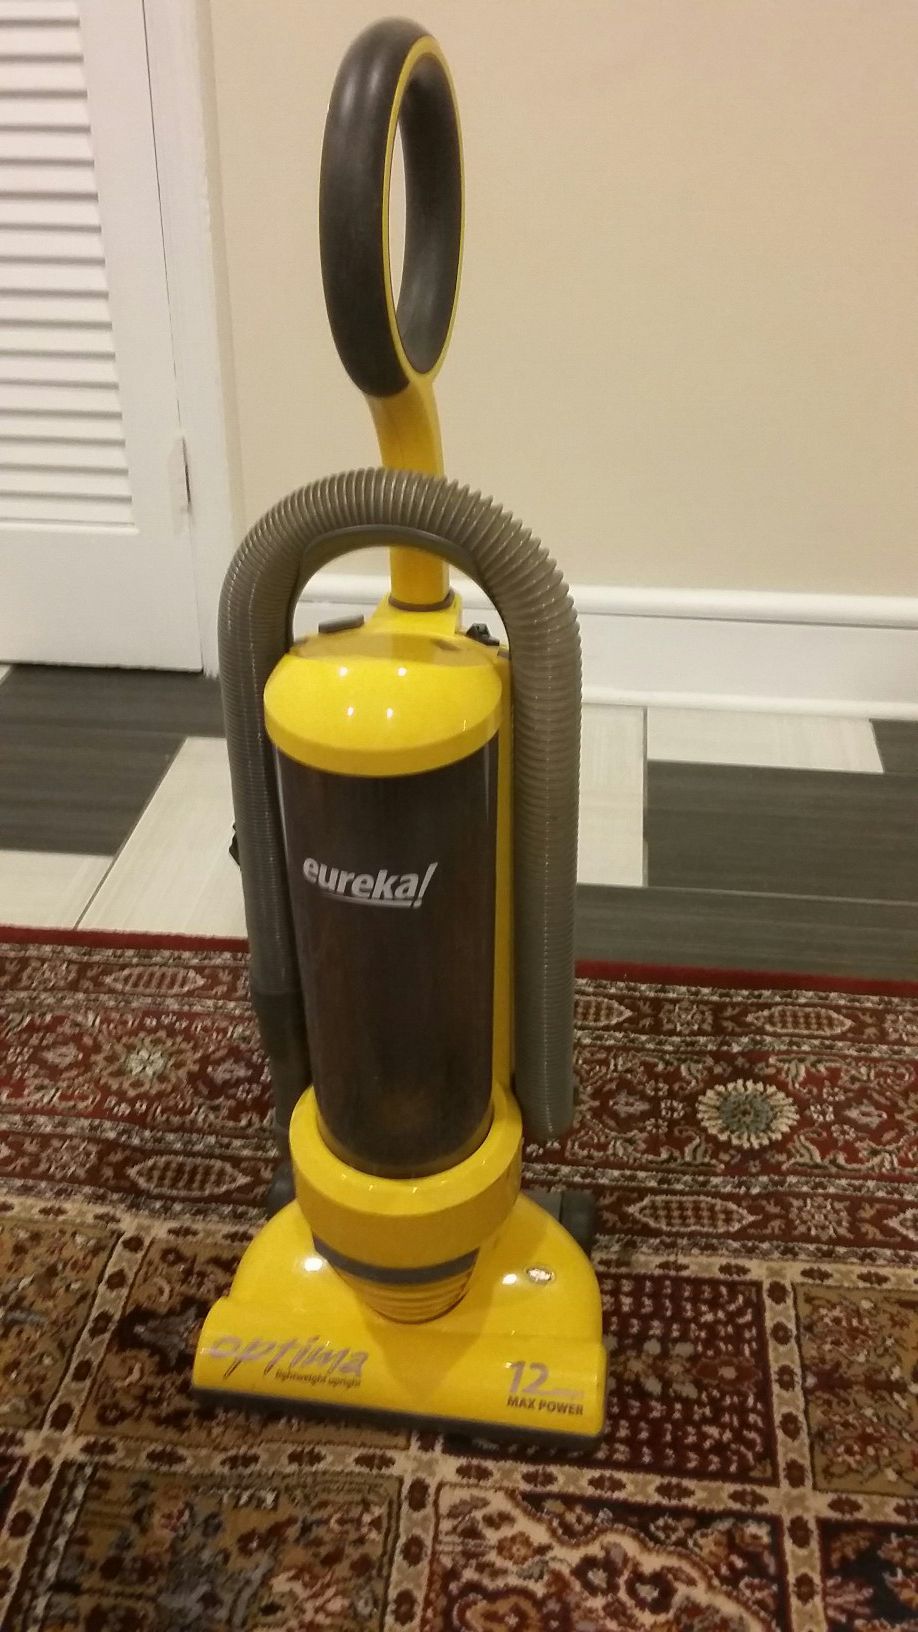 BEAUTIFUL EUREKA OPTIMA 12 AMPS BAGLESS VACUUM CLEANER WITH EXTENDABLE HANDLE. EXCELLENT CONDITION LIKE NEW